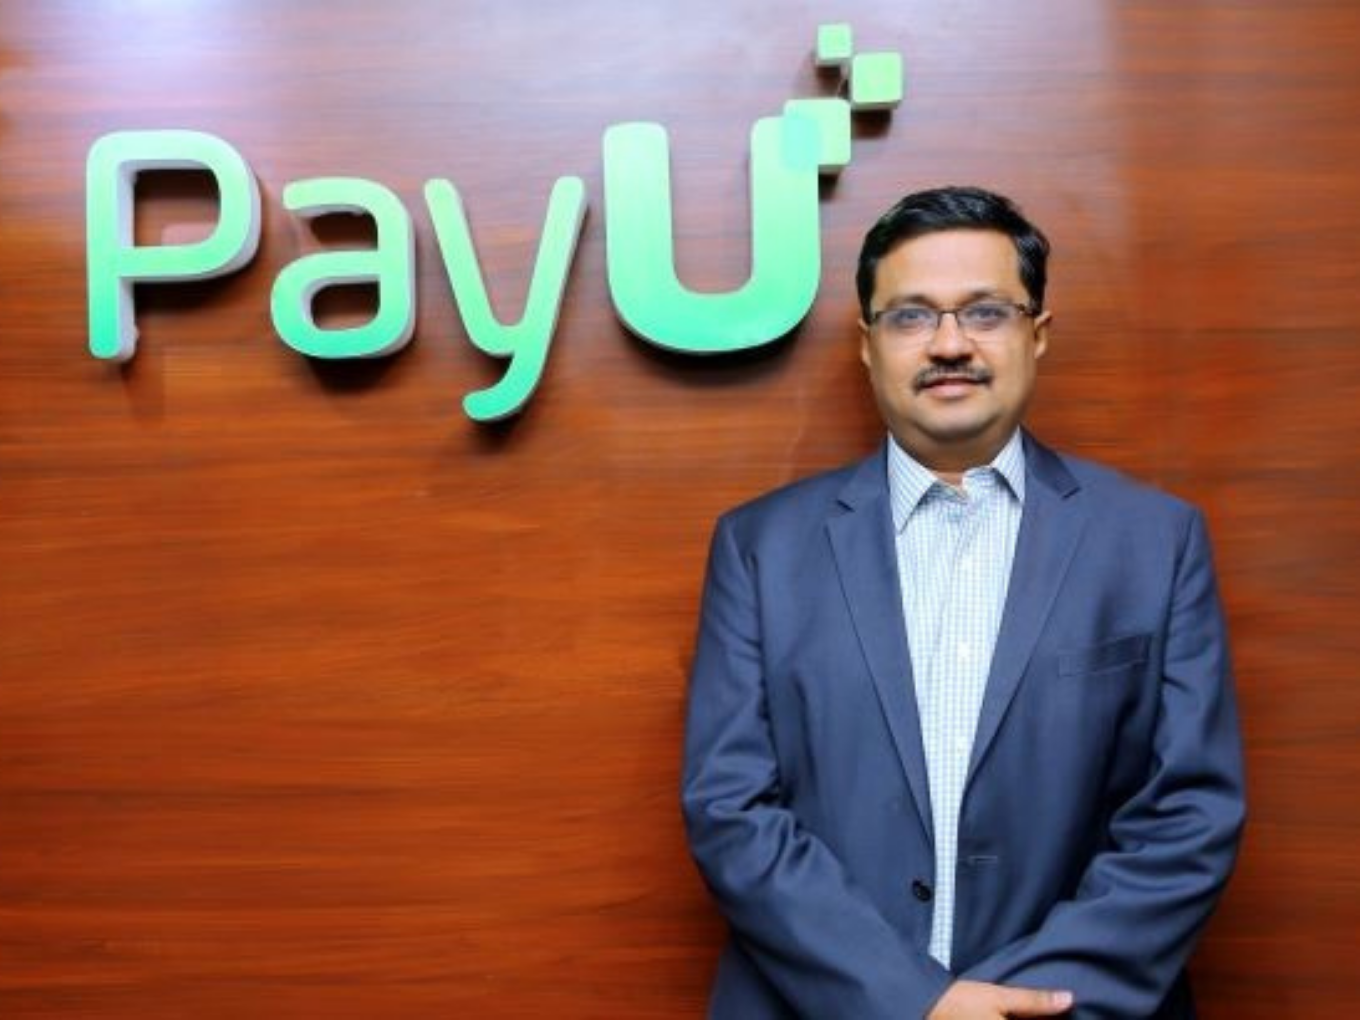 PayU India Submits Revised Merger Notification To CCI On Proposed $4.7 Bn BillDesk Buyout Deal